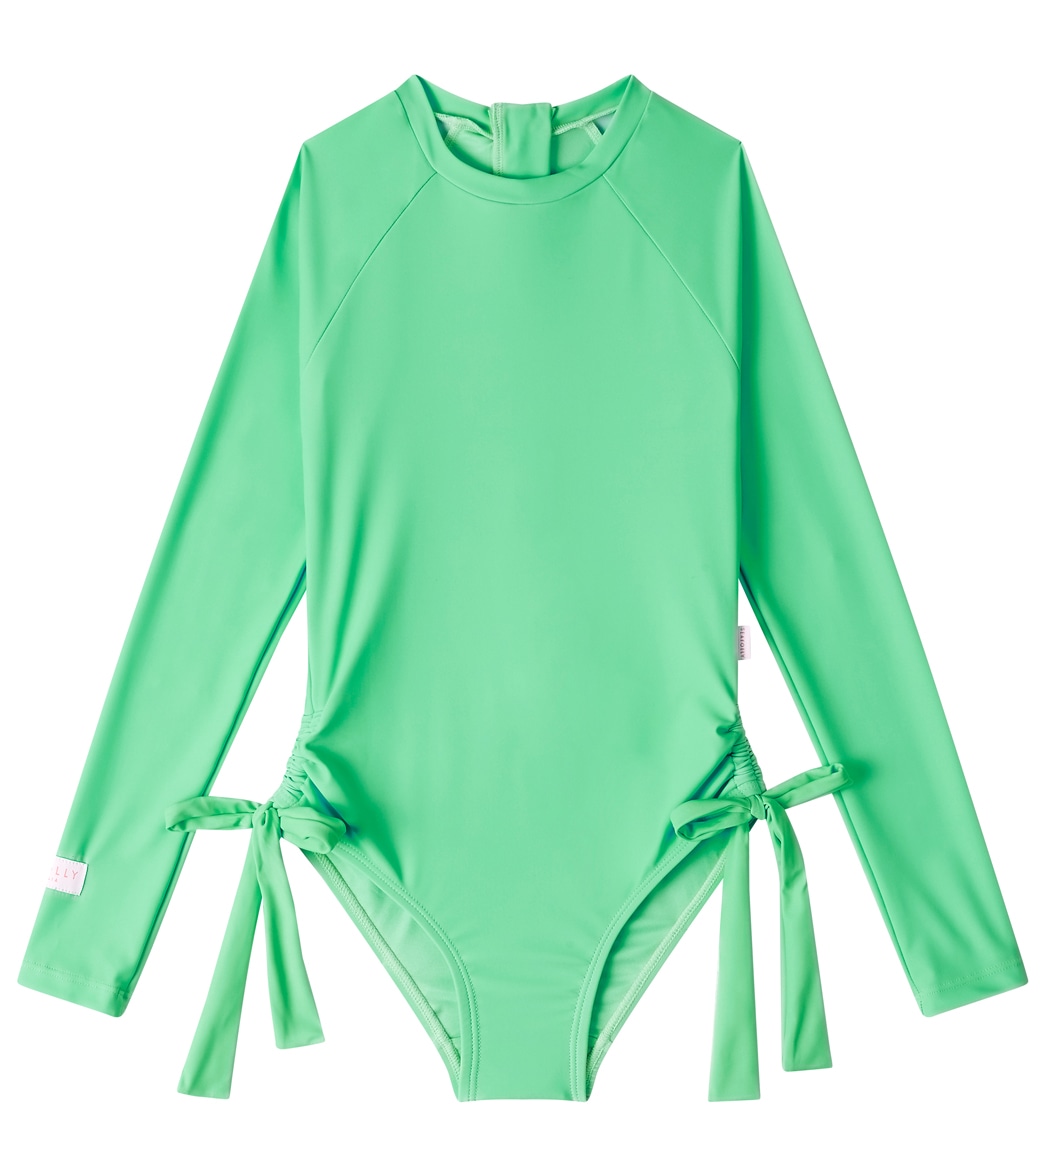 Seafolly Girls' Essential Long Sleeve One Piece Swimsuit Big Kid - Jade 10 - Swimoutlet.com